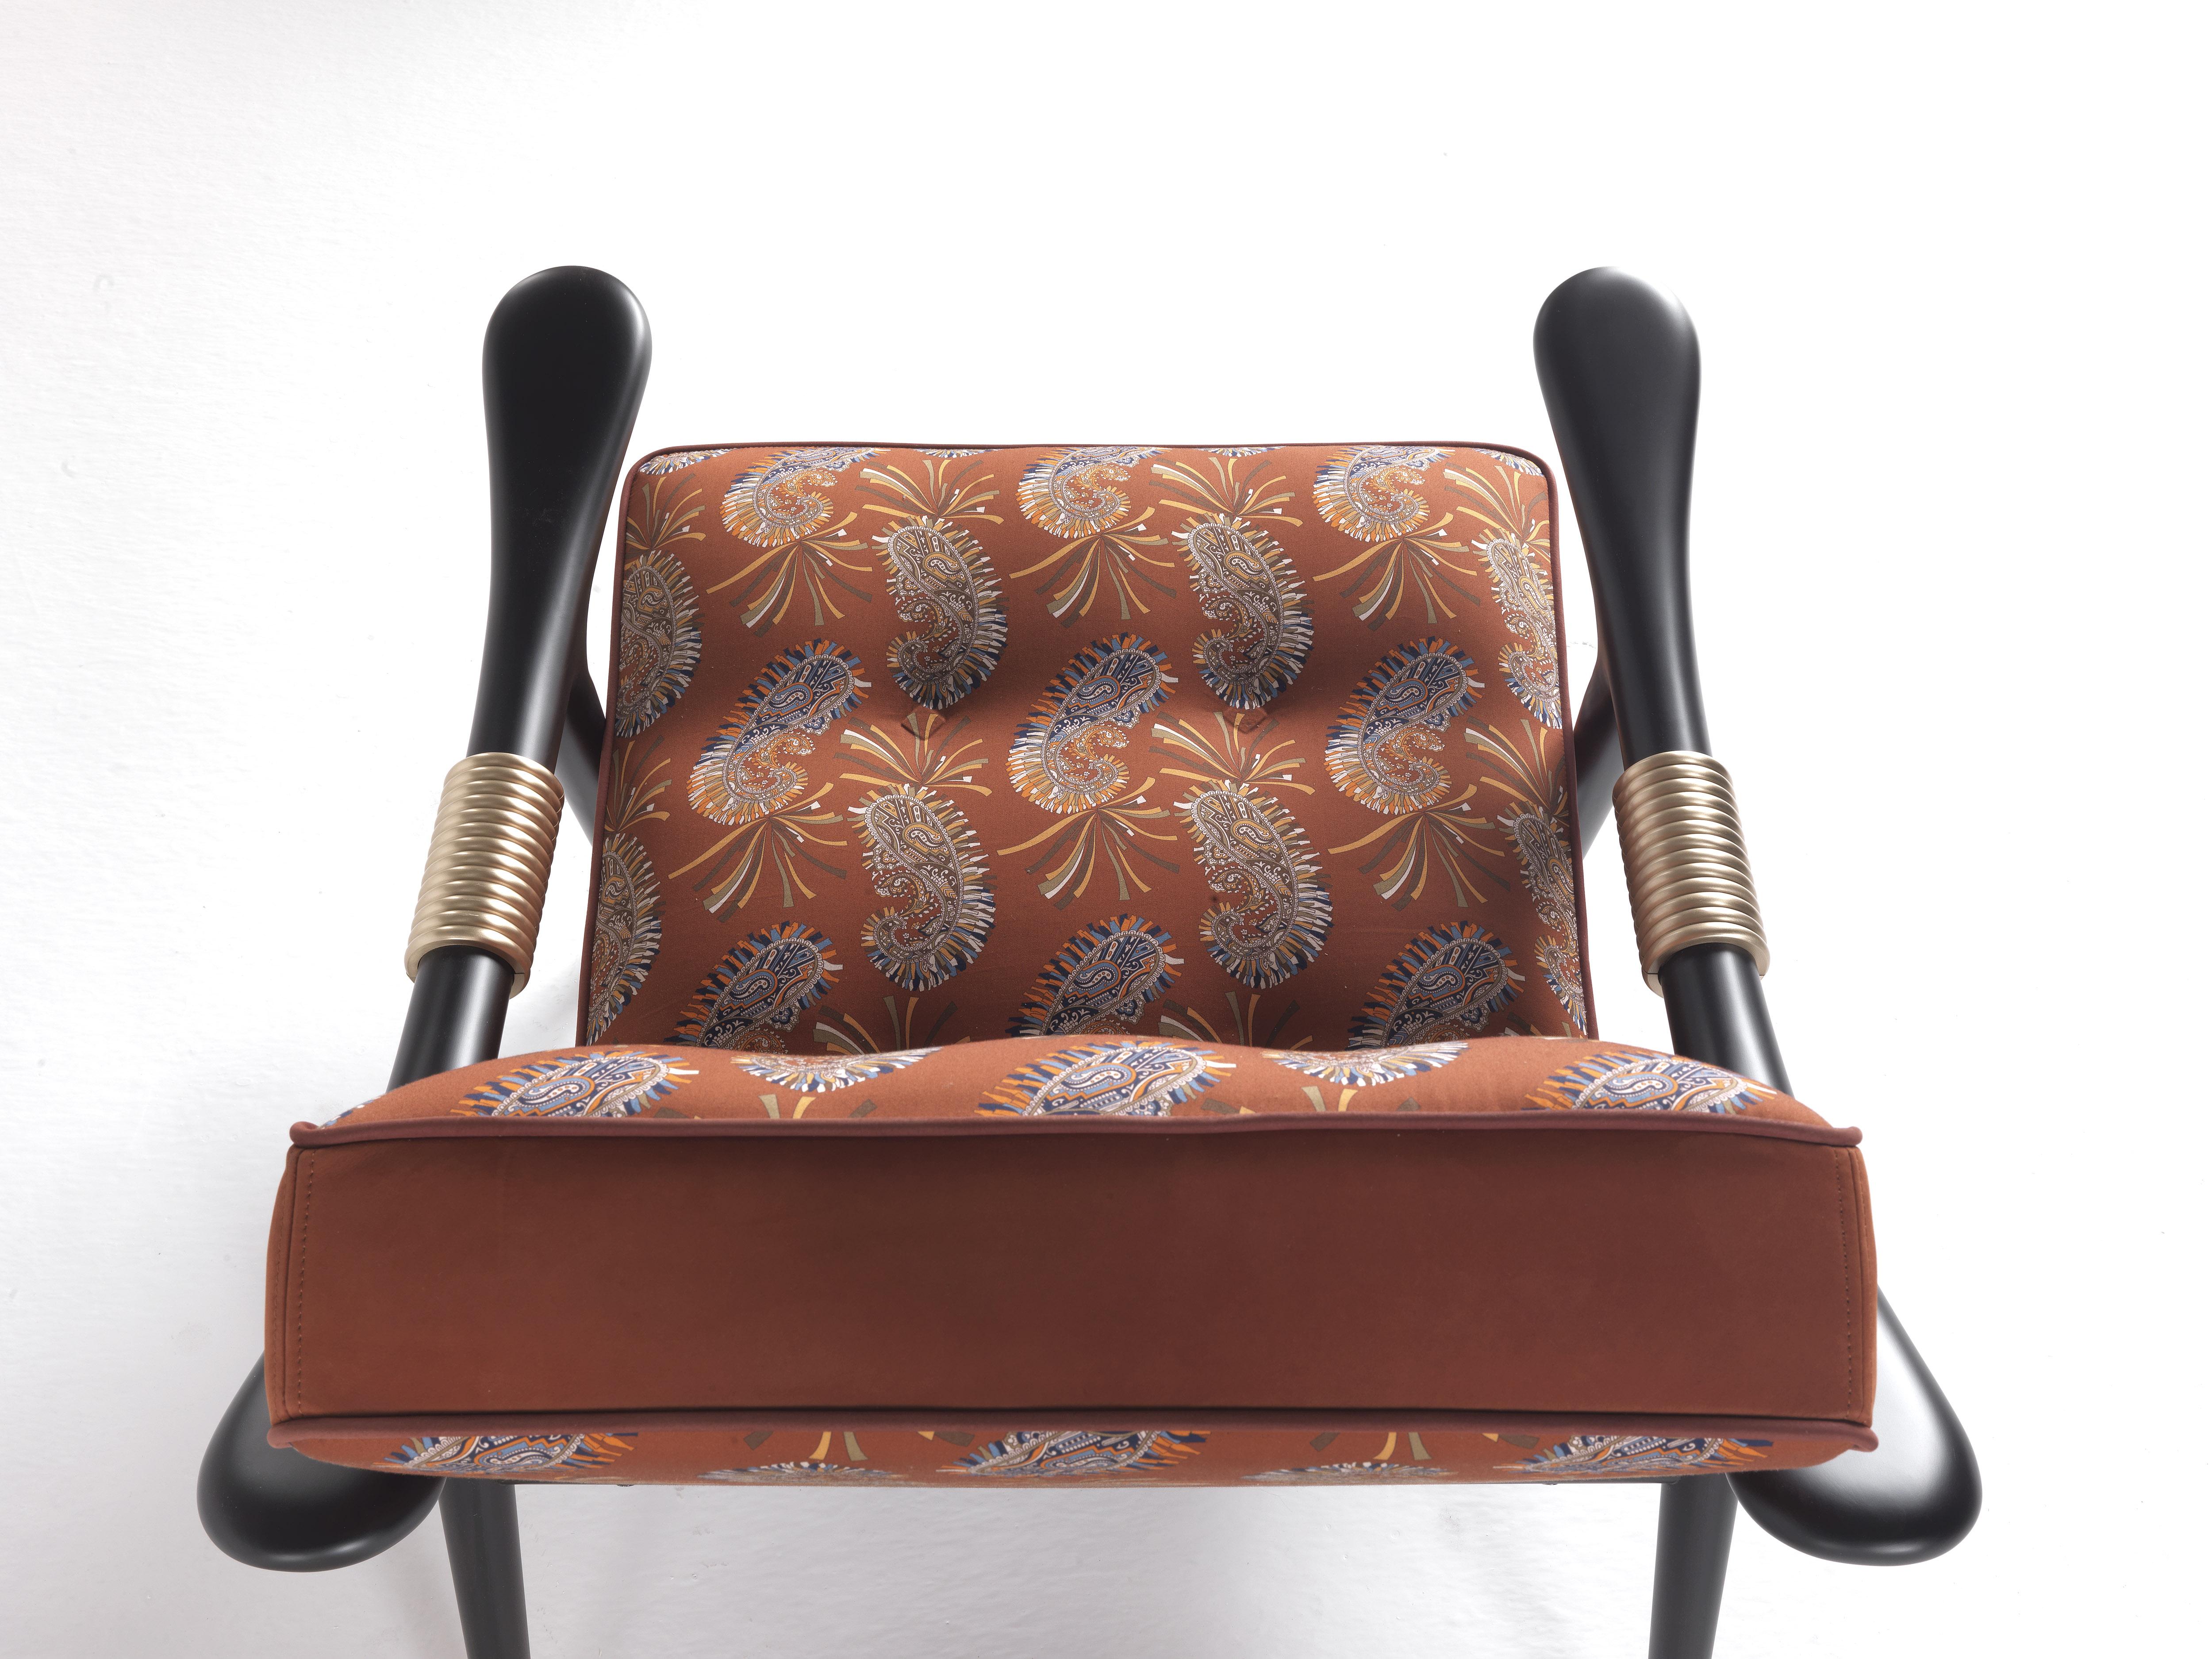 Modern 21st Century Masai Armchair in Wodabe Fabric by Etro Home Interiors For Sale